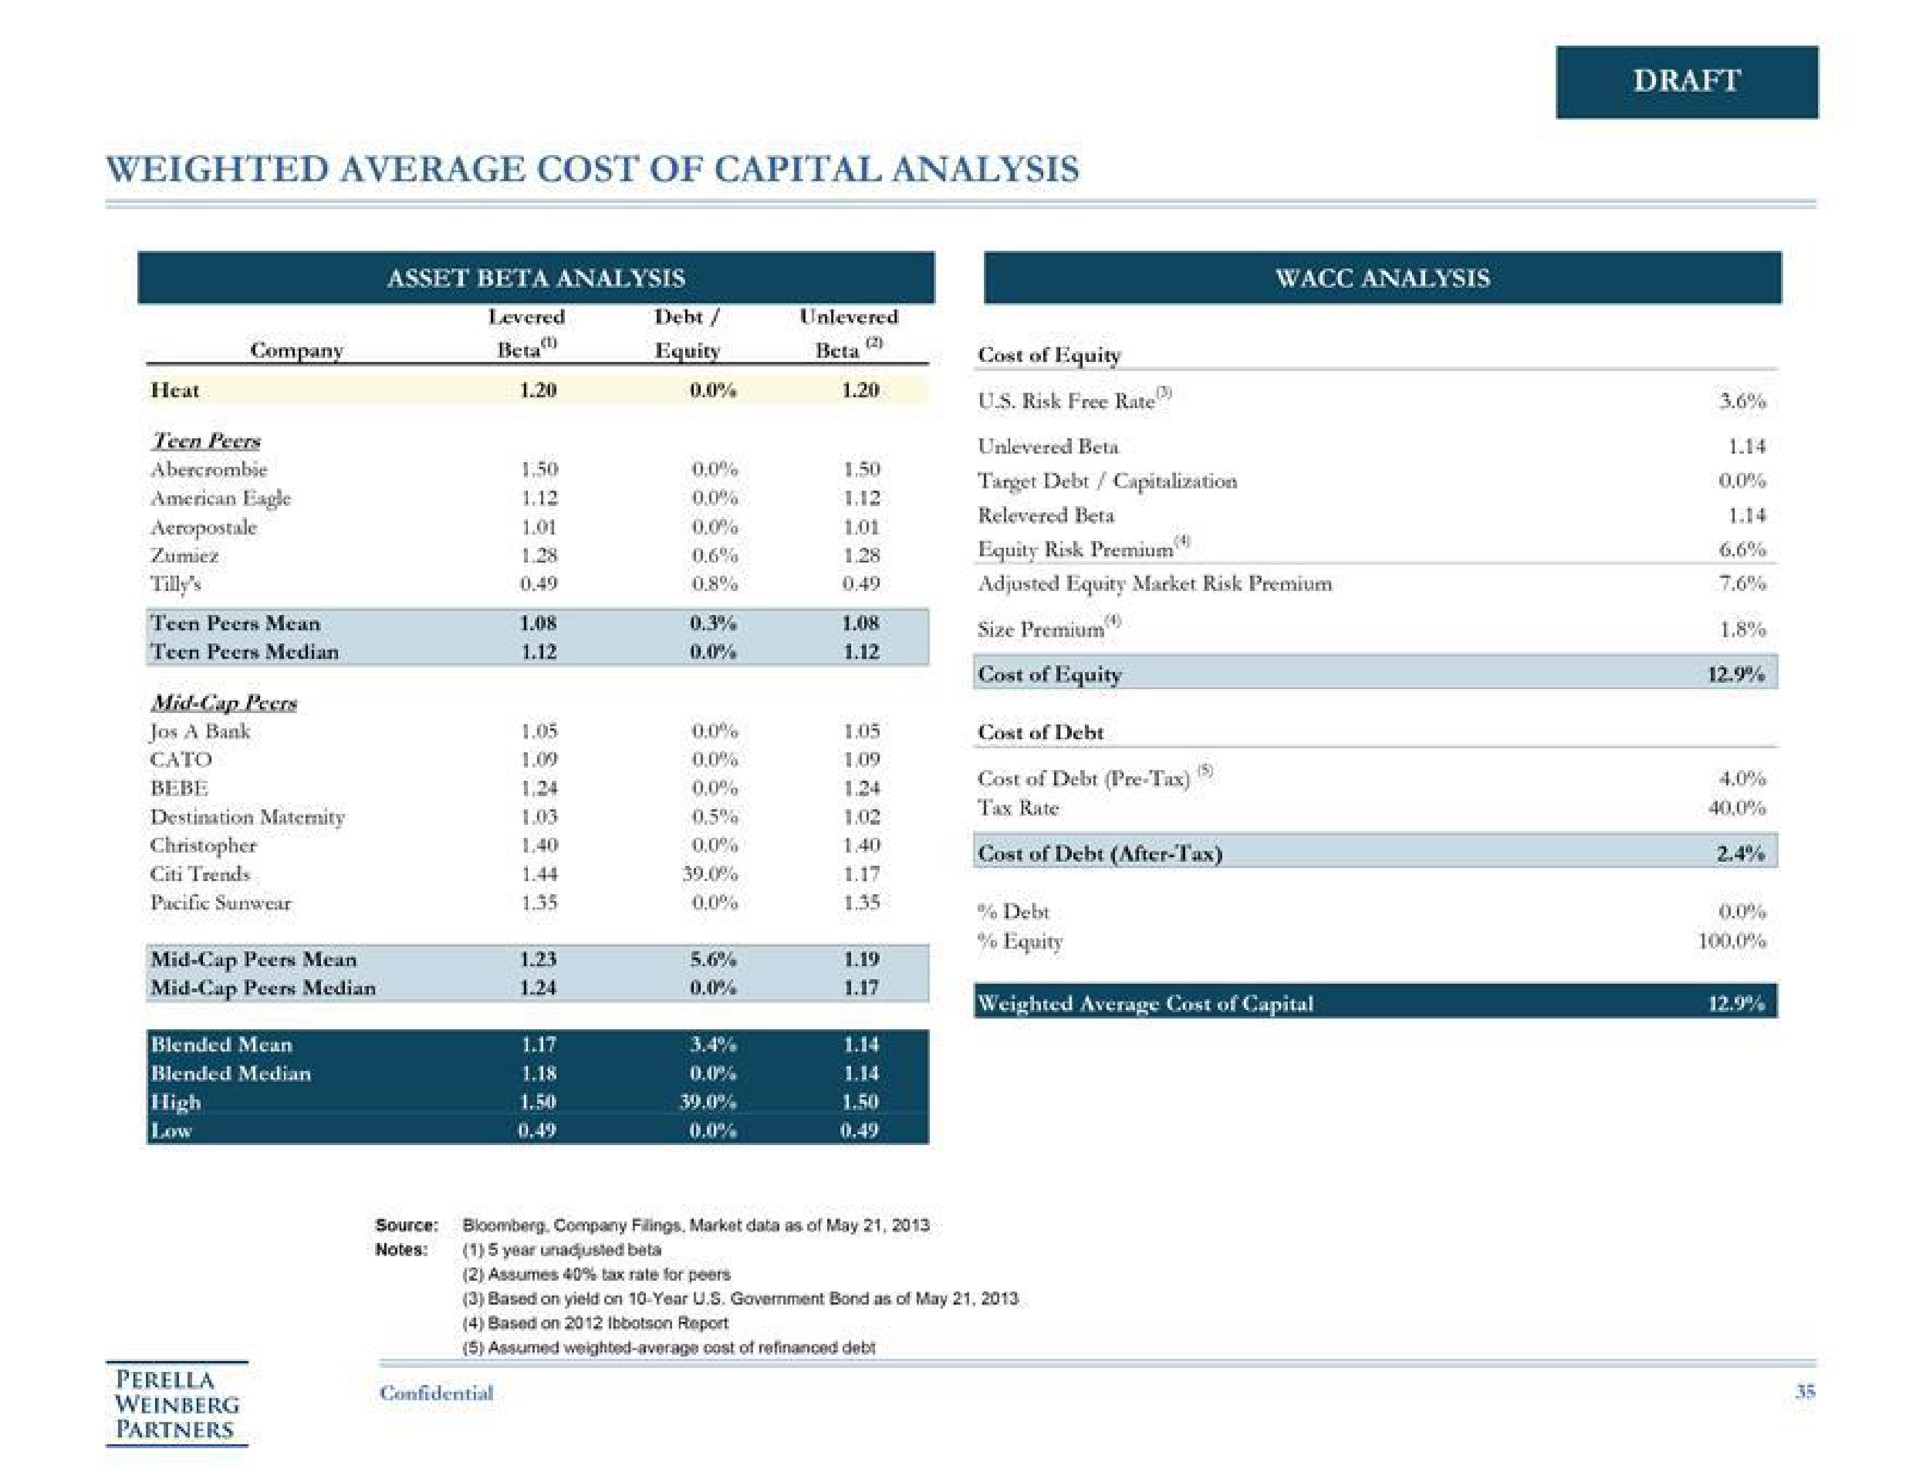 draft weighted average cost of capital analysis cost of debt after tax sate | Perella Weinberg Partners